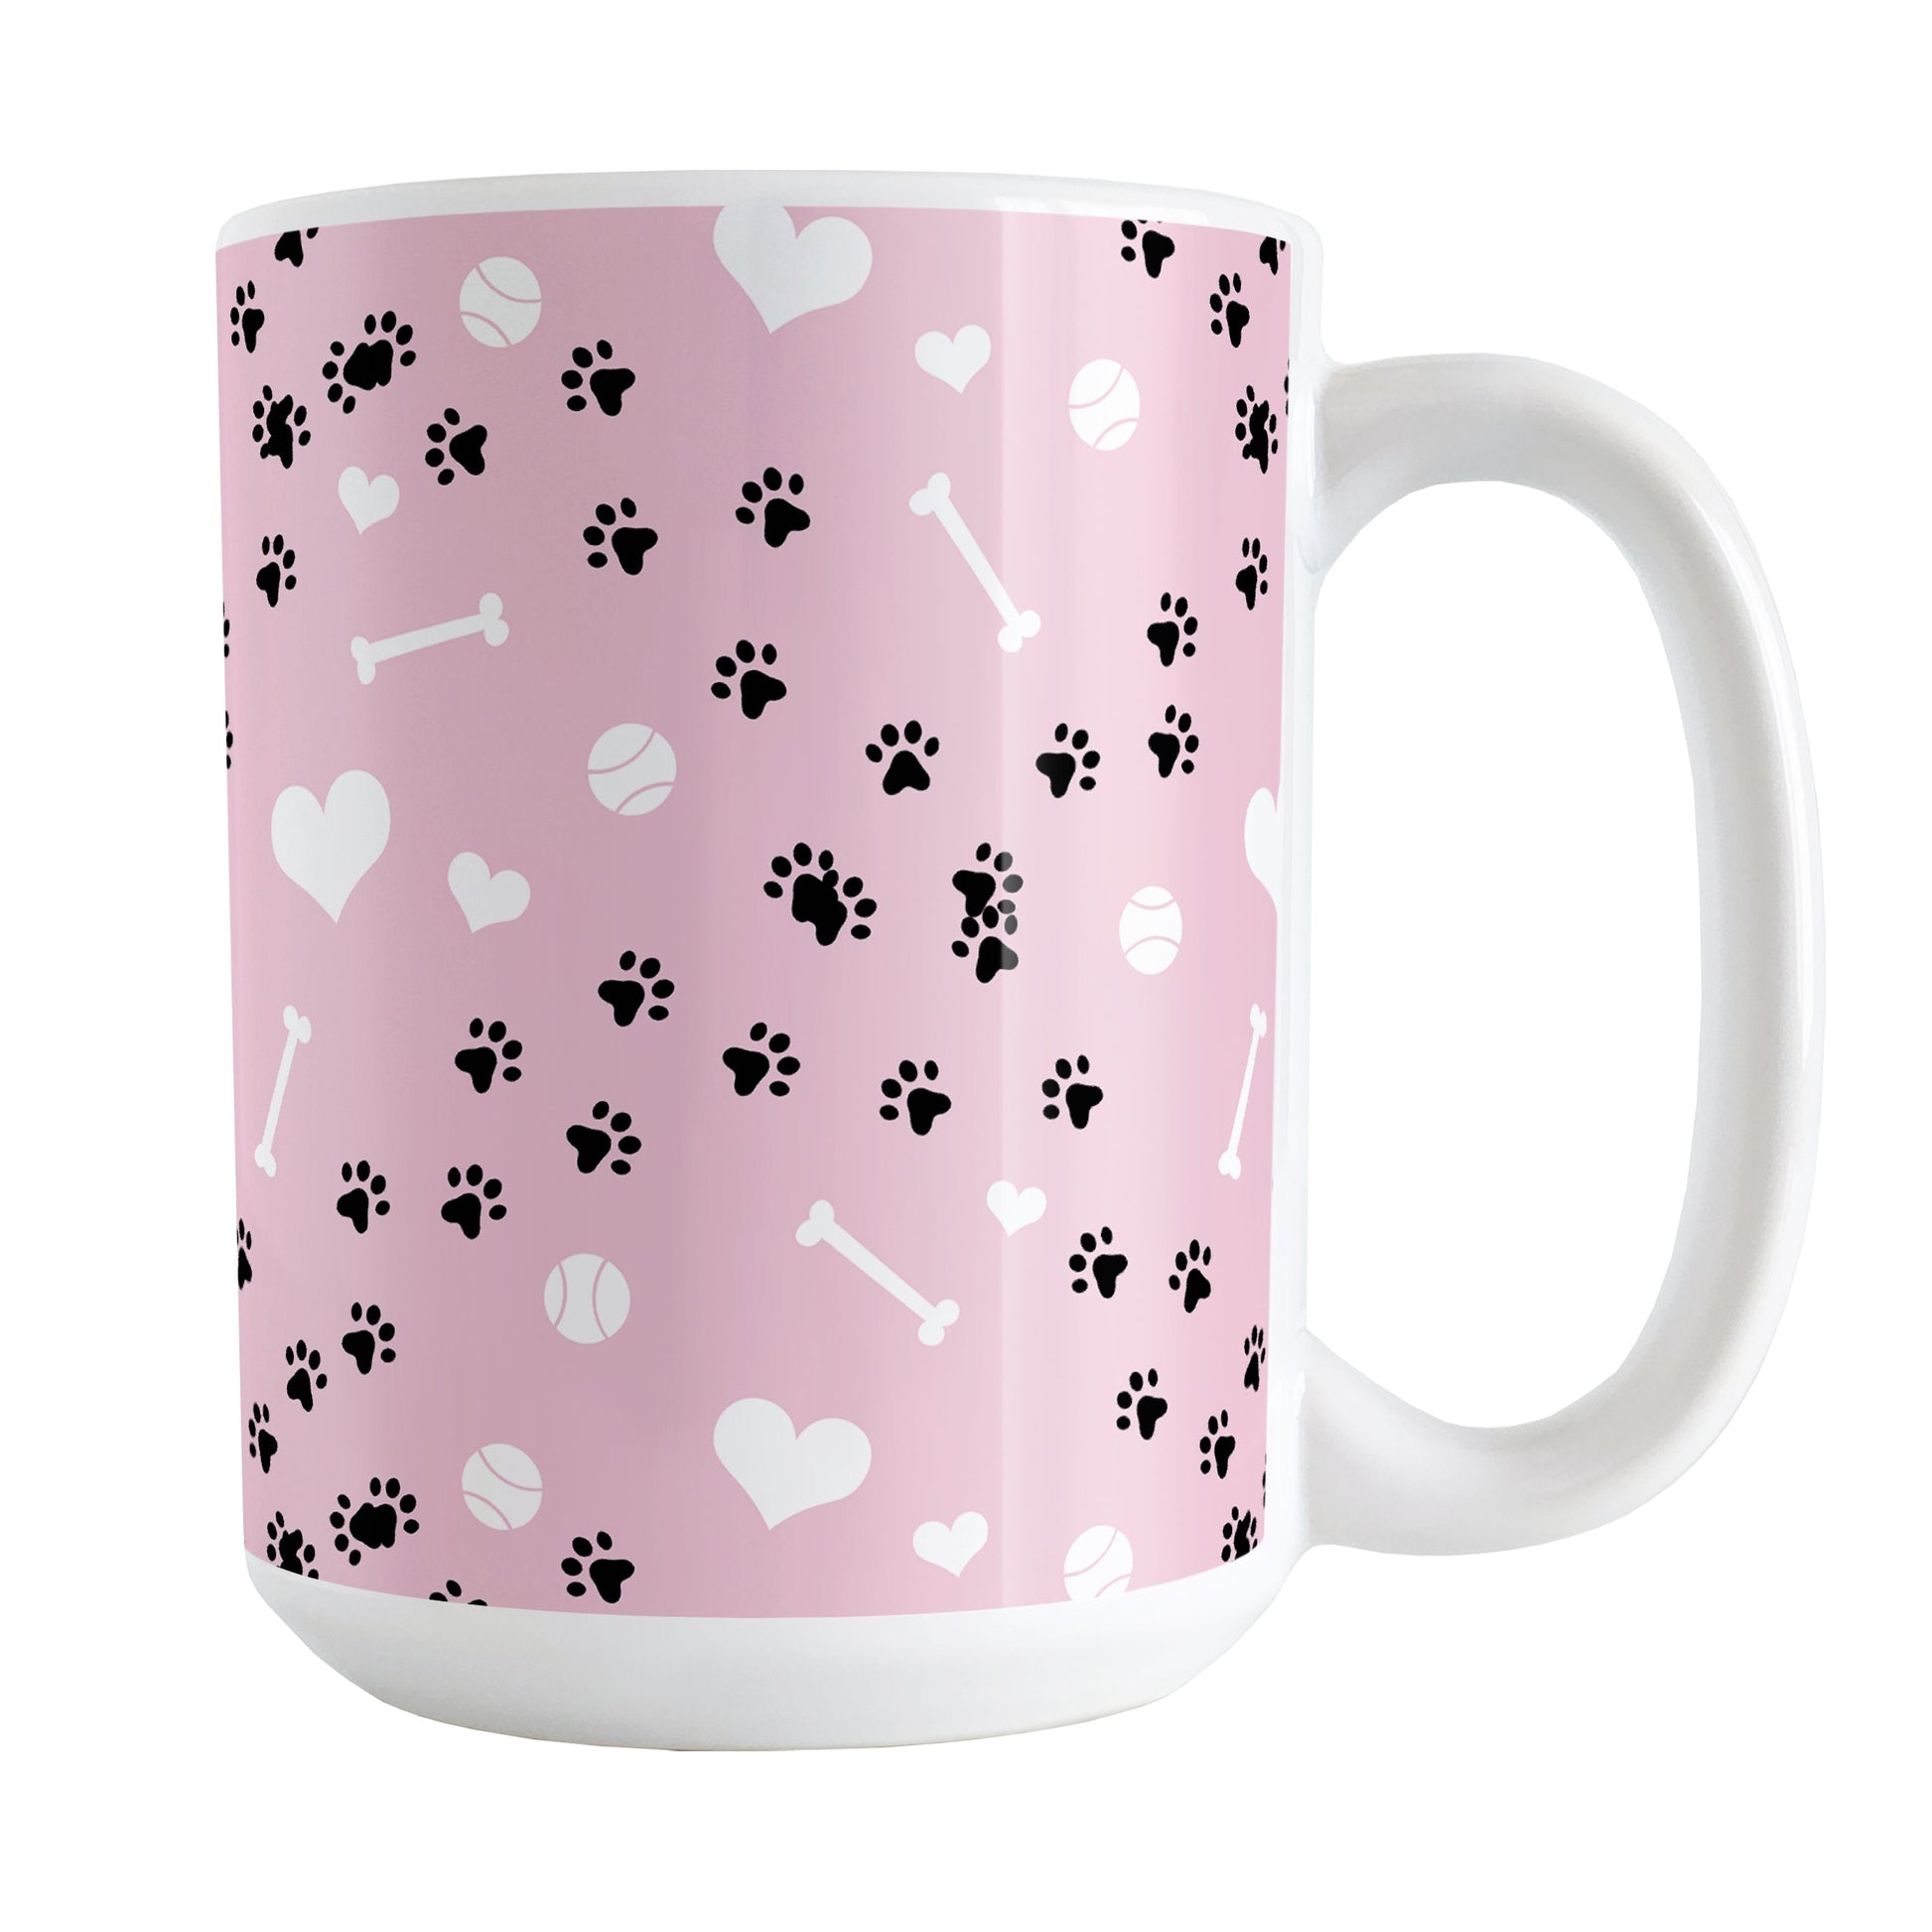 Puppy Run Pink Dog Mug (15oz) at Amy's Coffee Mugs. A ceramic coffee mug designed with a pattern of chaotic tracks of puppy paw prints running around the mug with white dog bones, balls, and hearts over a light pink background. This mug is perfect for people who love the chaotic play of puppies, love dogs, and like pink mugs. 